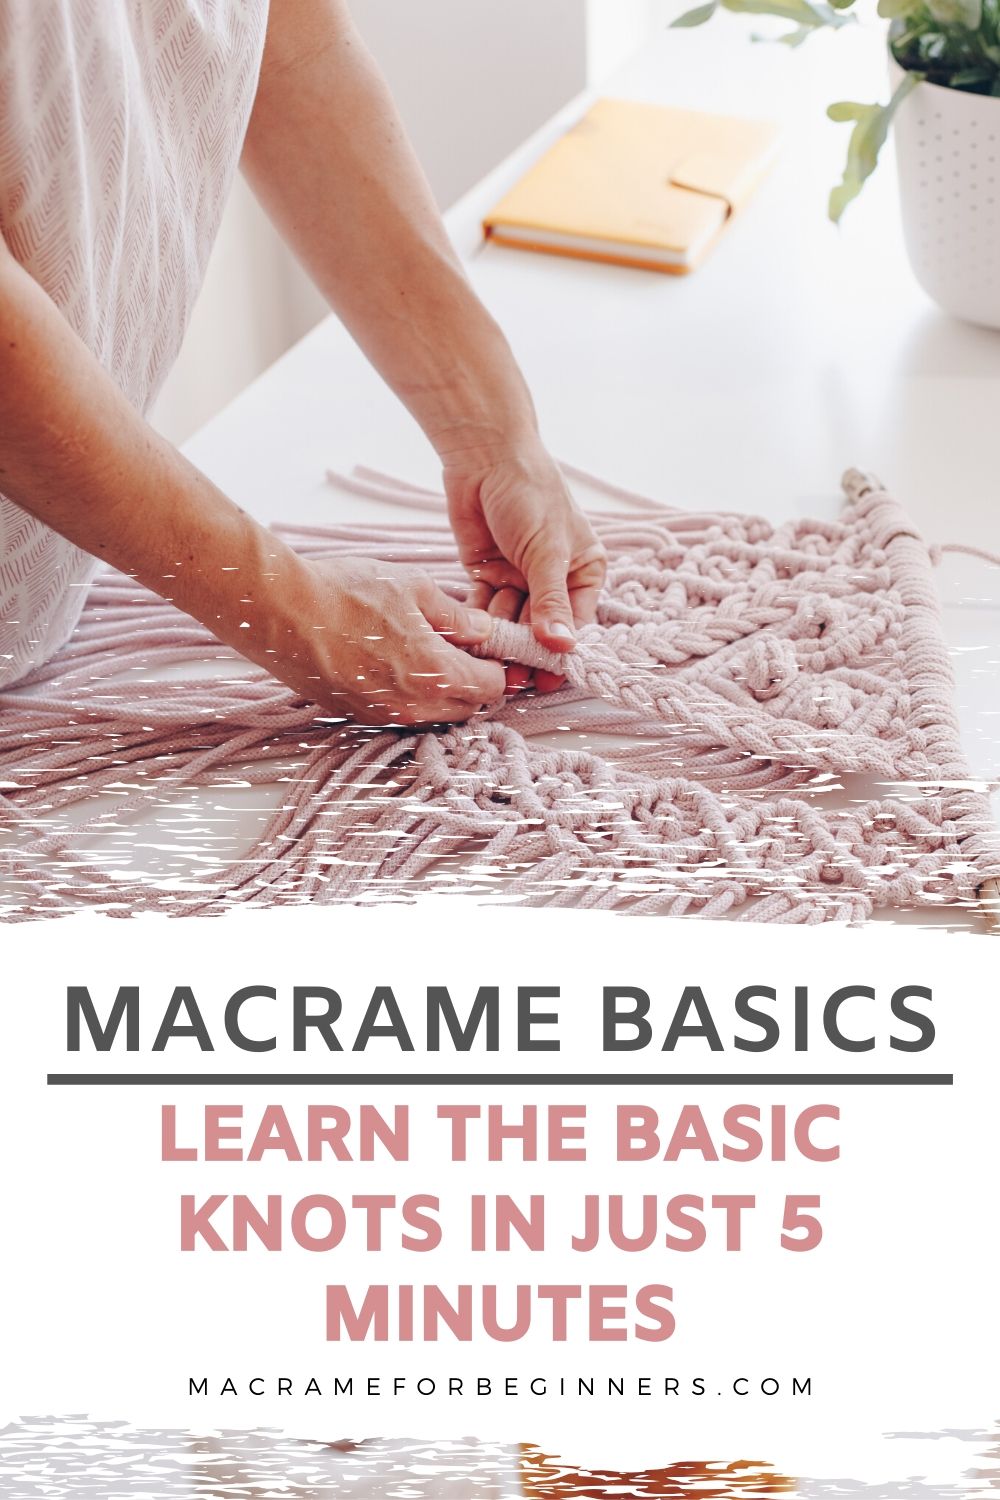 Macrame Basics - Learn The Basic Knots In Just 5 Minutes - Macrame Tutorials for Beginners